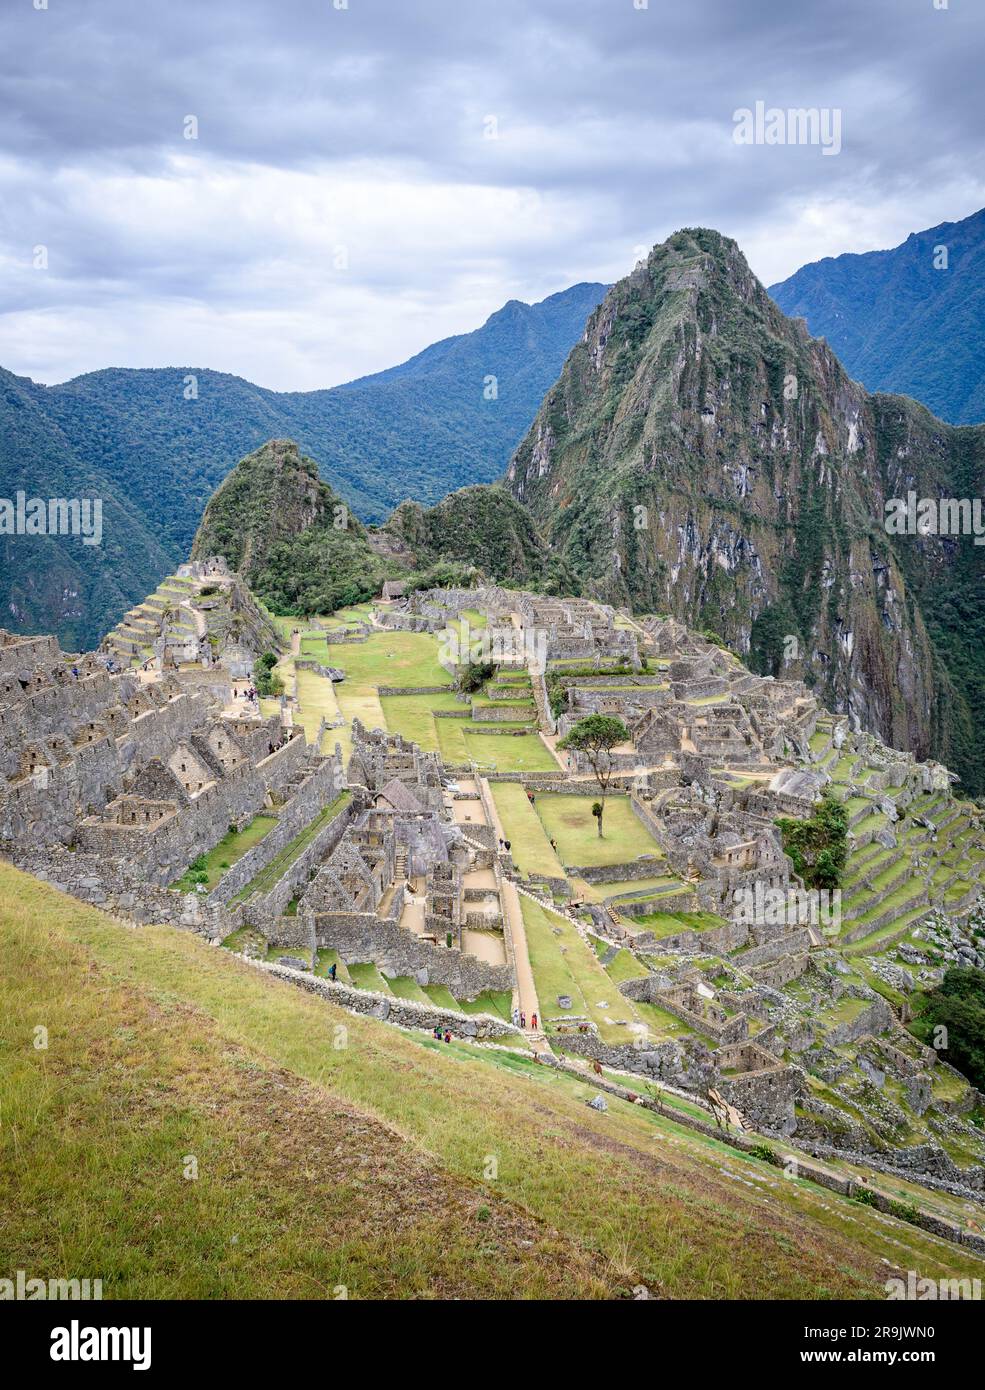 The path to Machu Picchu, the high mountain capital of the Inca tribe, a 15th century citadel site, buildings and view of the plateau and Andes mounta Stock Photo